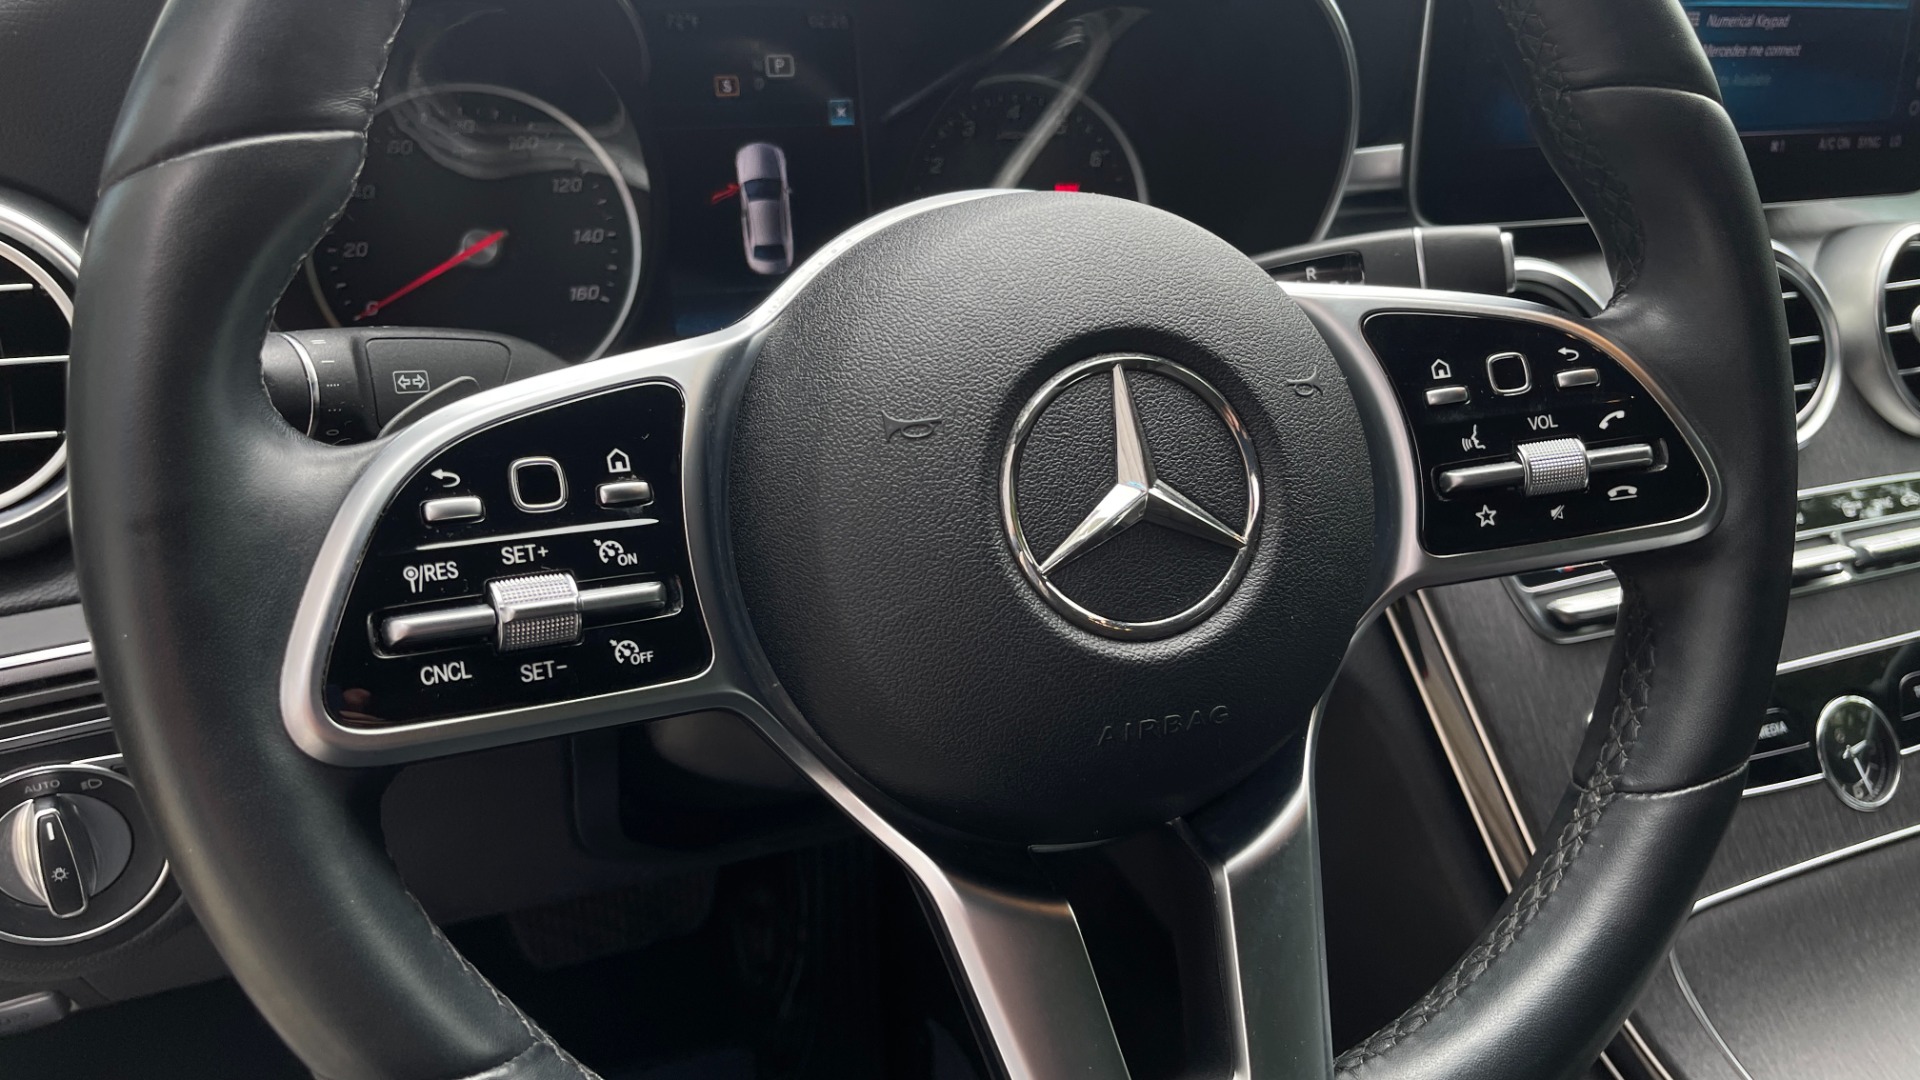 Used 2019 Mercedes-Benz C-Class C 300 / BURMESTER SOUND / PANORAMIC ROOF / WIRELESS CHARING for sale $33,995 at Formula Imports in Charlotte NC 28227 23